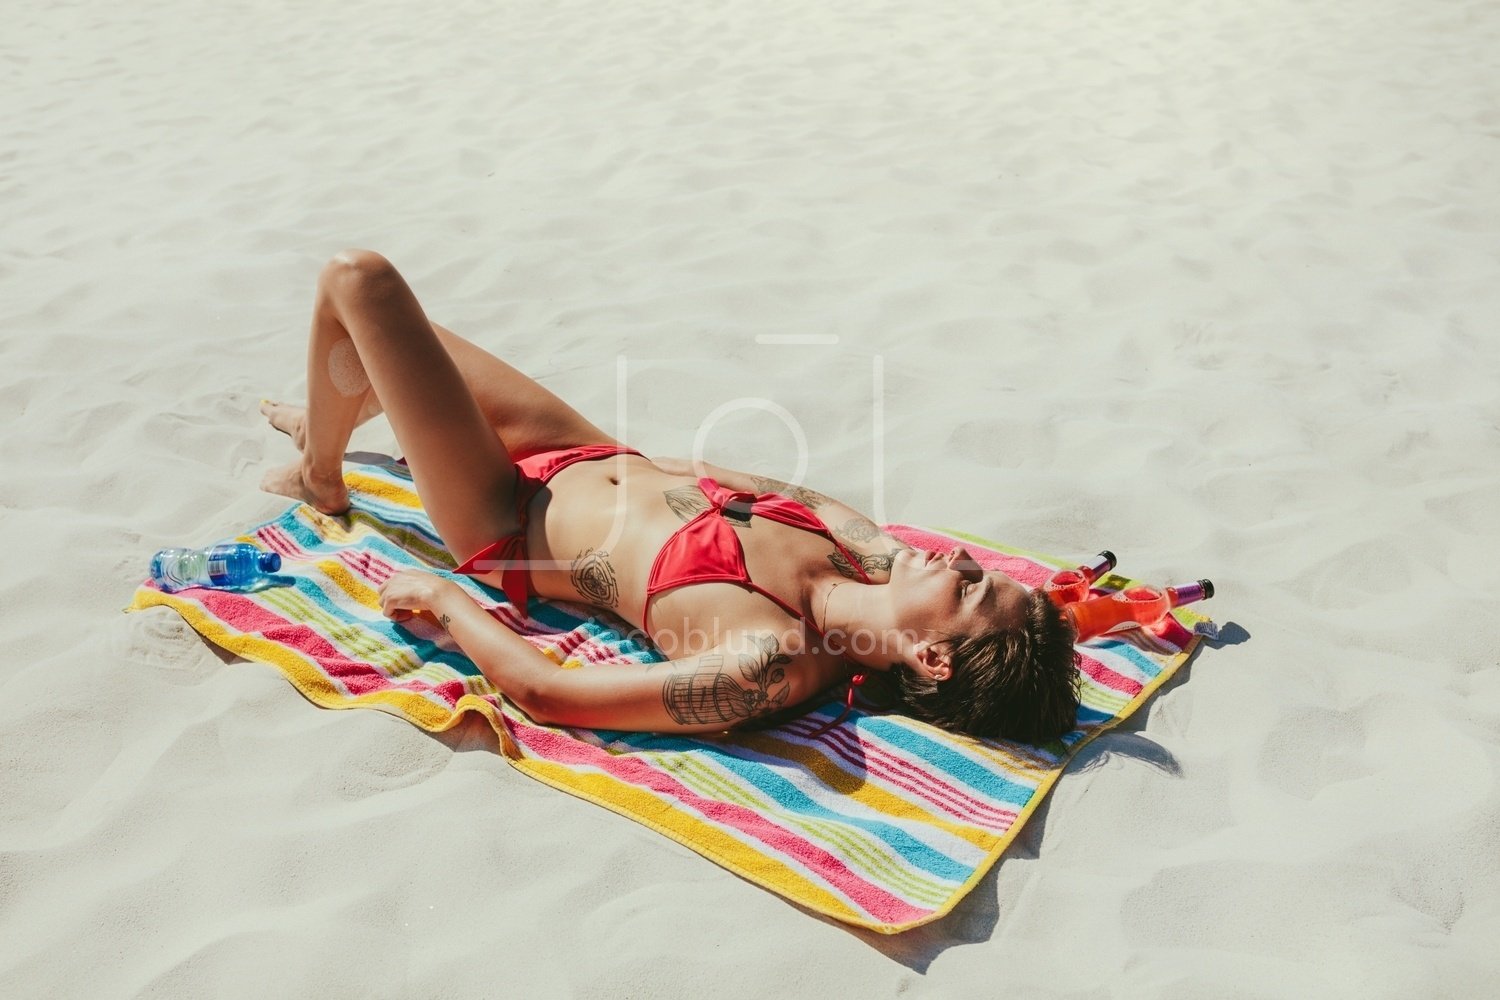 bryan gutierrez recommends tanning on the beach photography pic